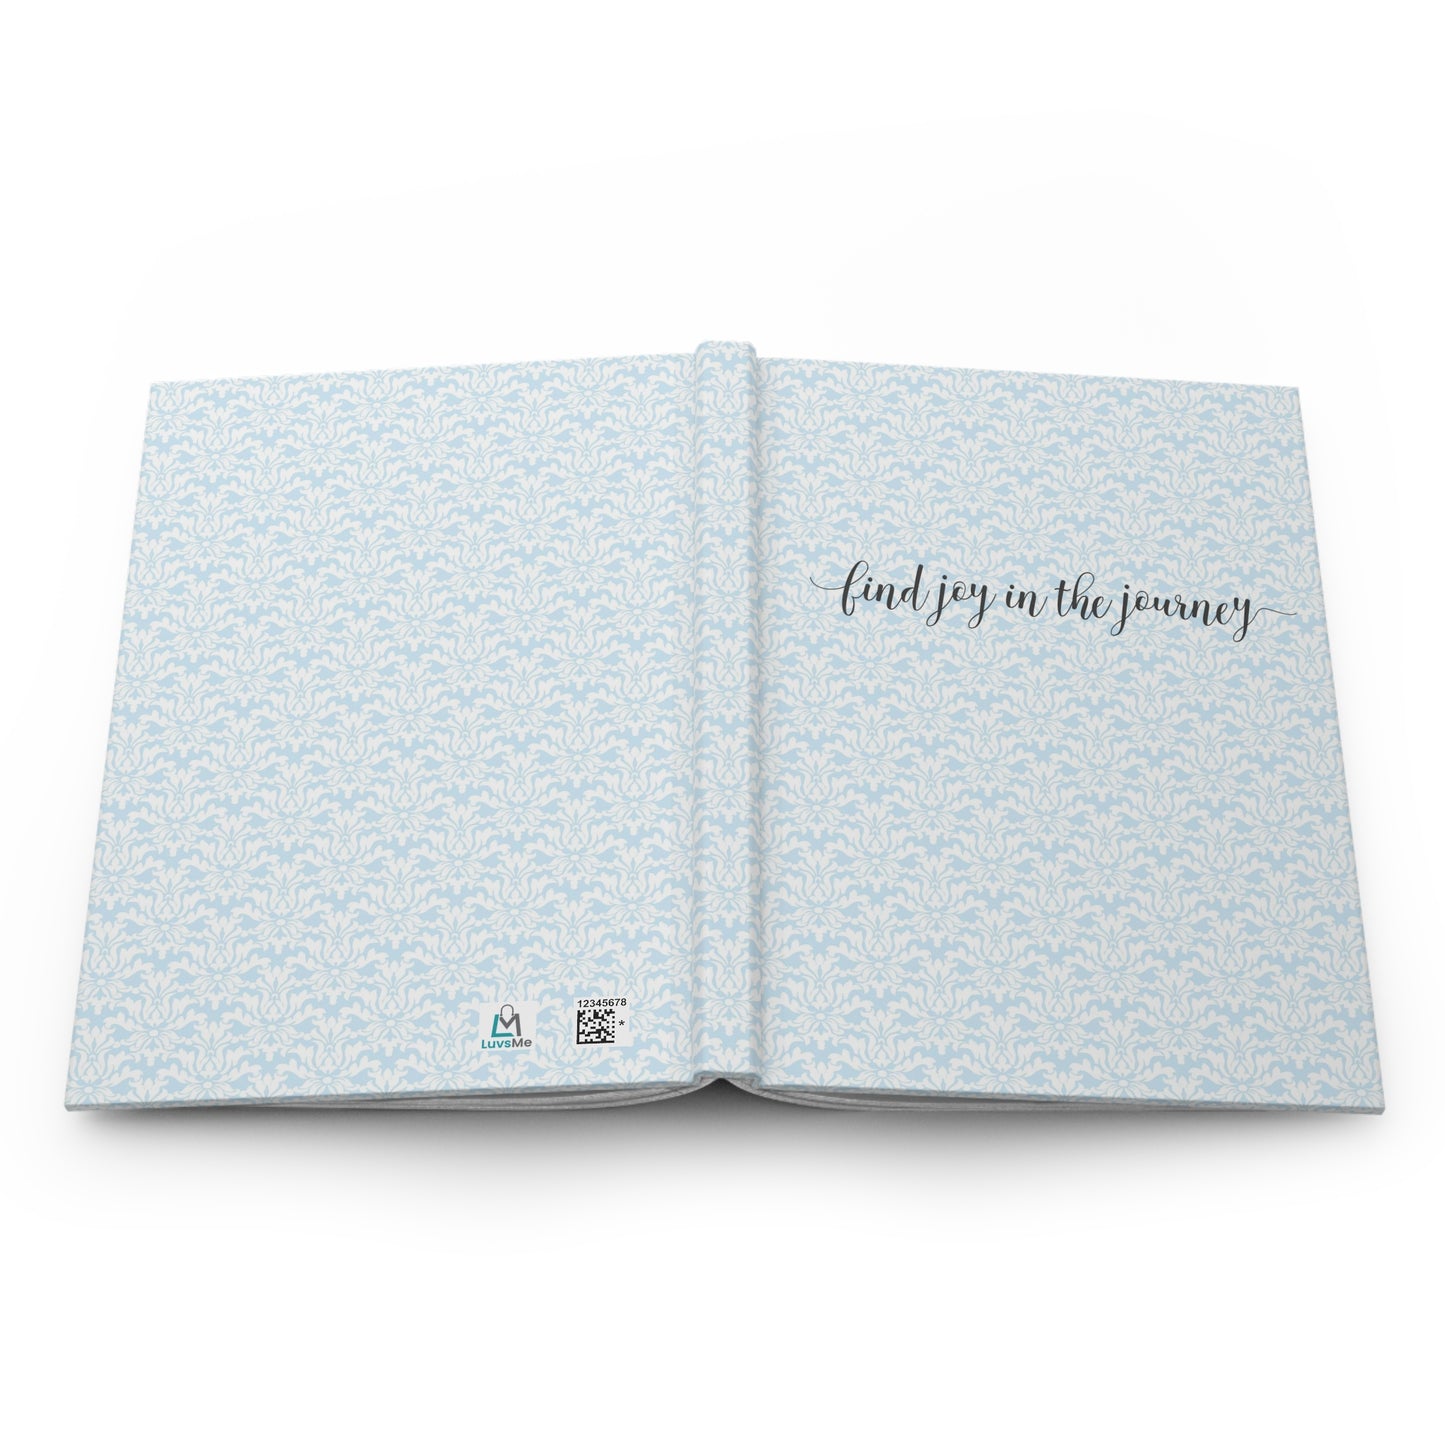 Find joy in the journey - Self Love - Inspirational Quote  - Light Blue 9 - Hardcover Journal Matte